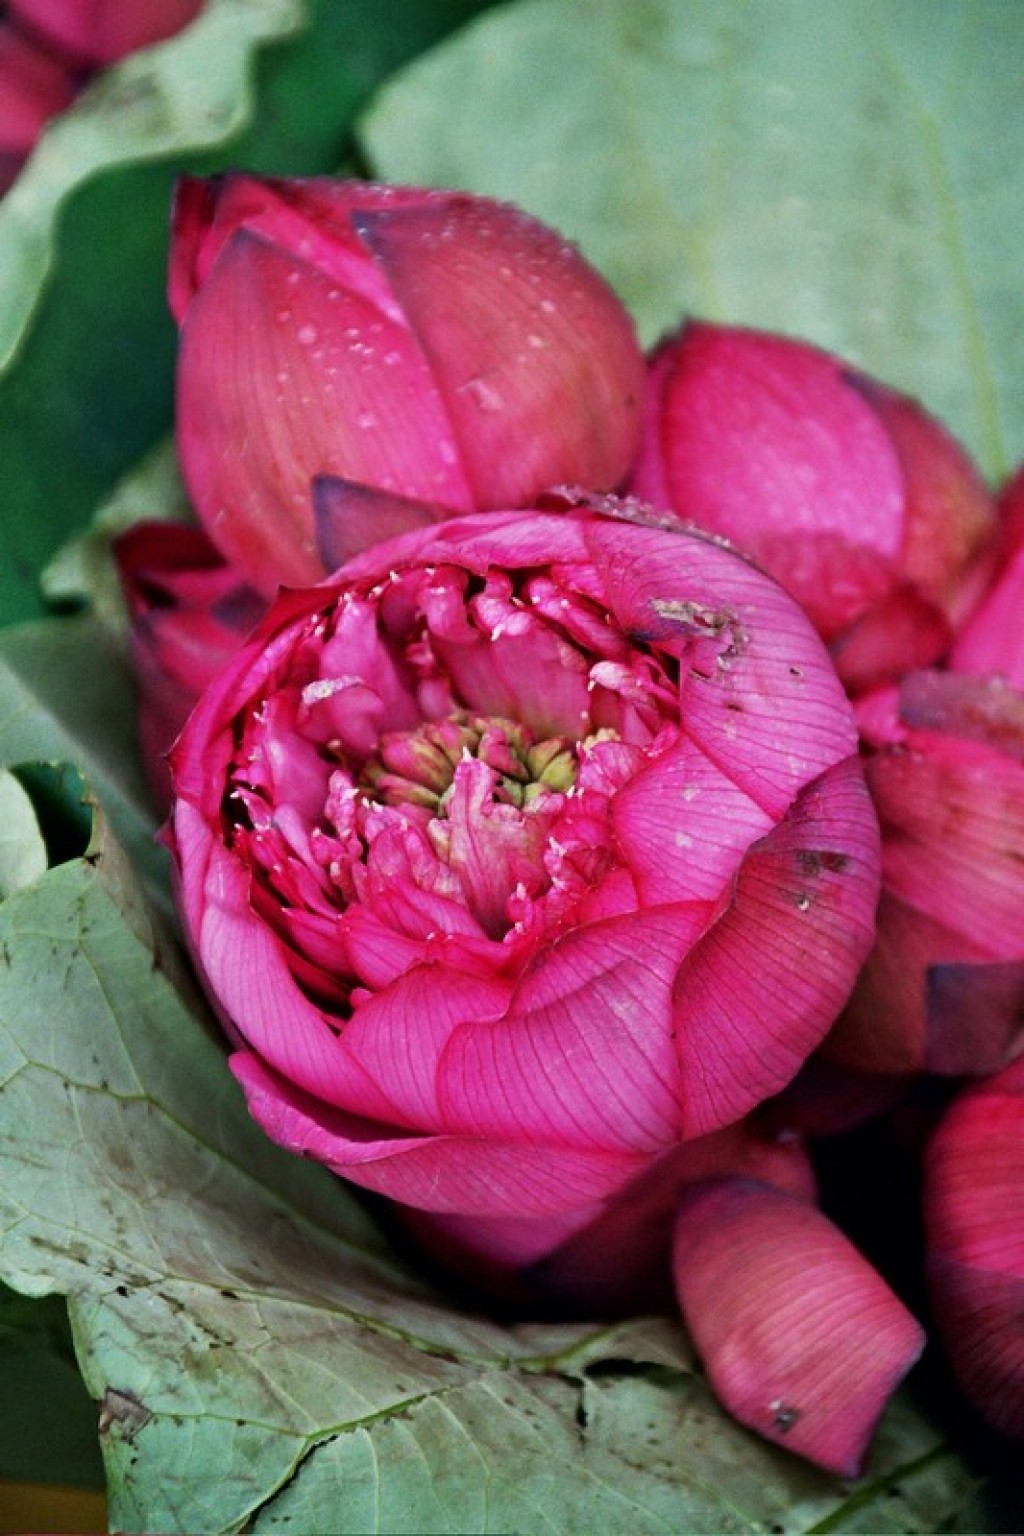 Lotus flower - very important for Buddhists.